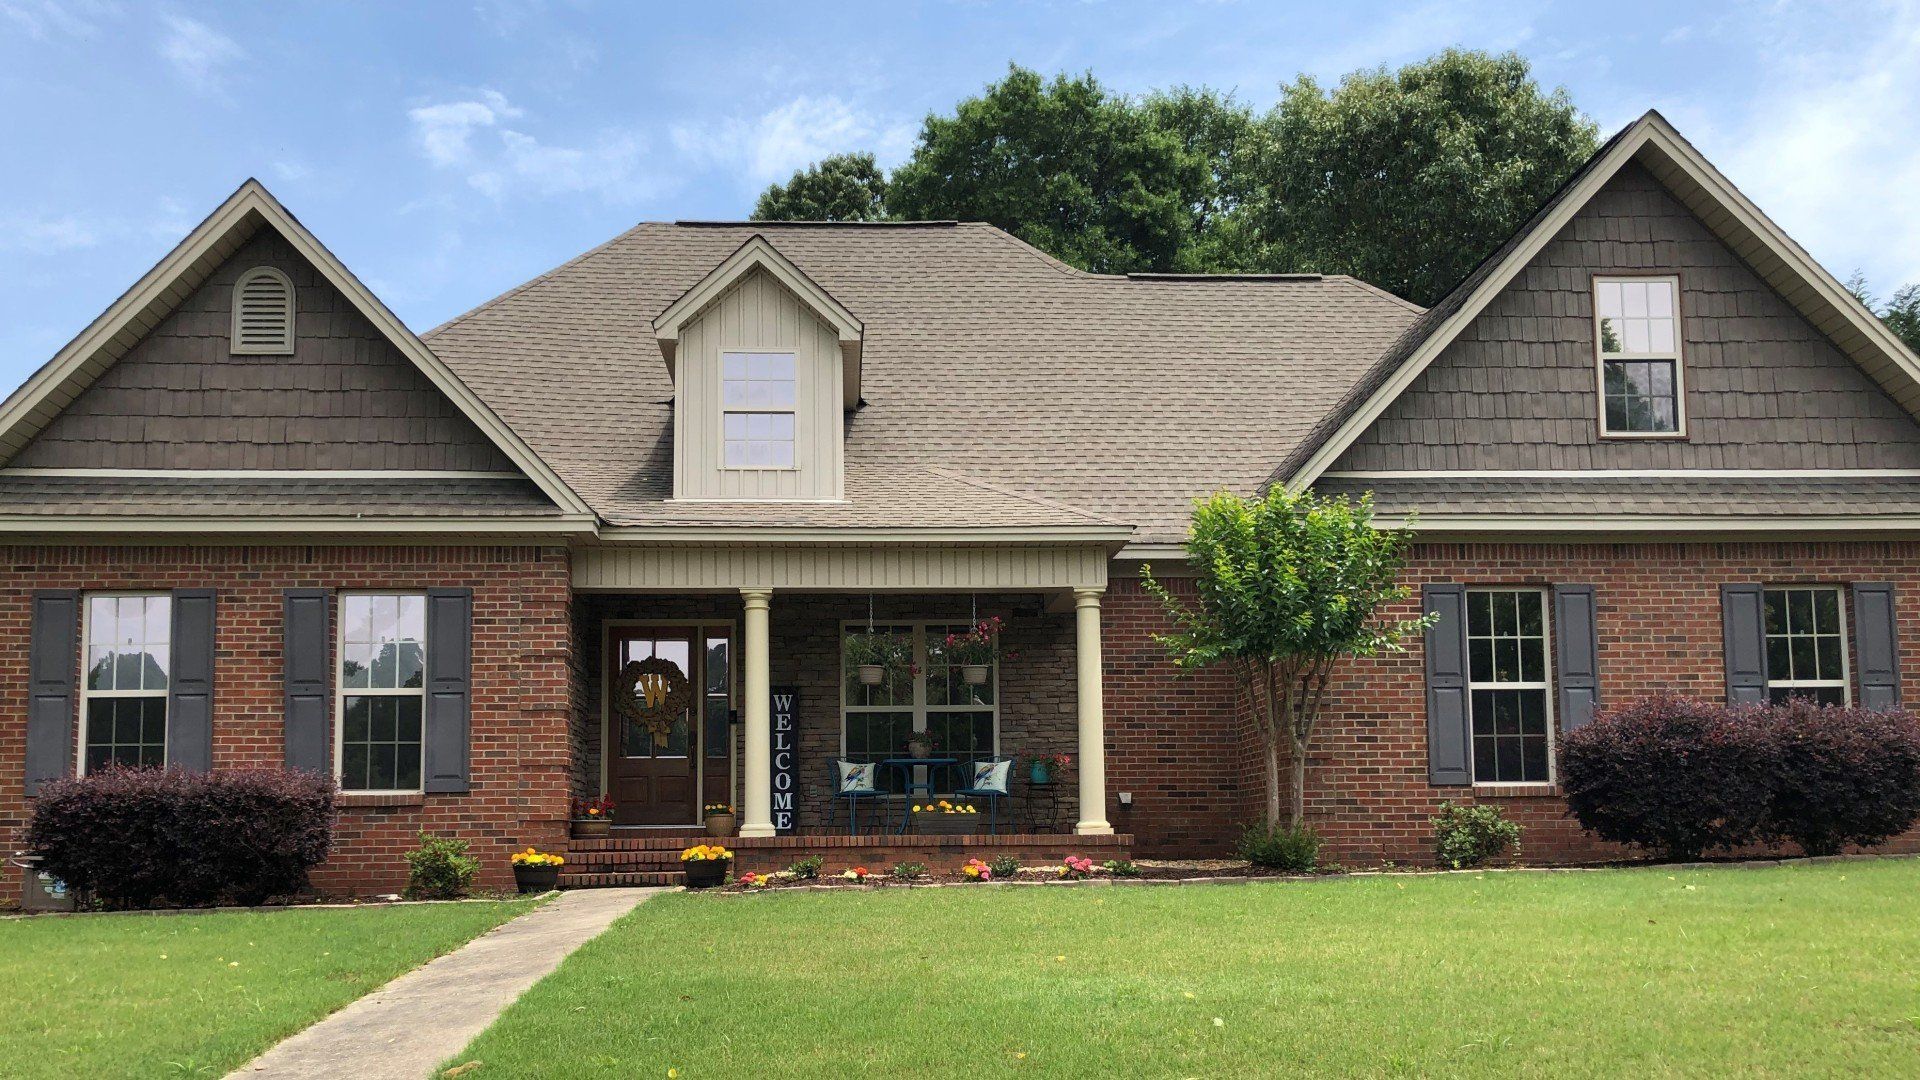 Professional Residential tint installation on 5.10.2019 - Home window tinting service in Prattville, Alabama